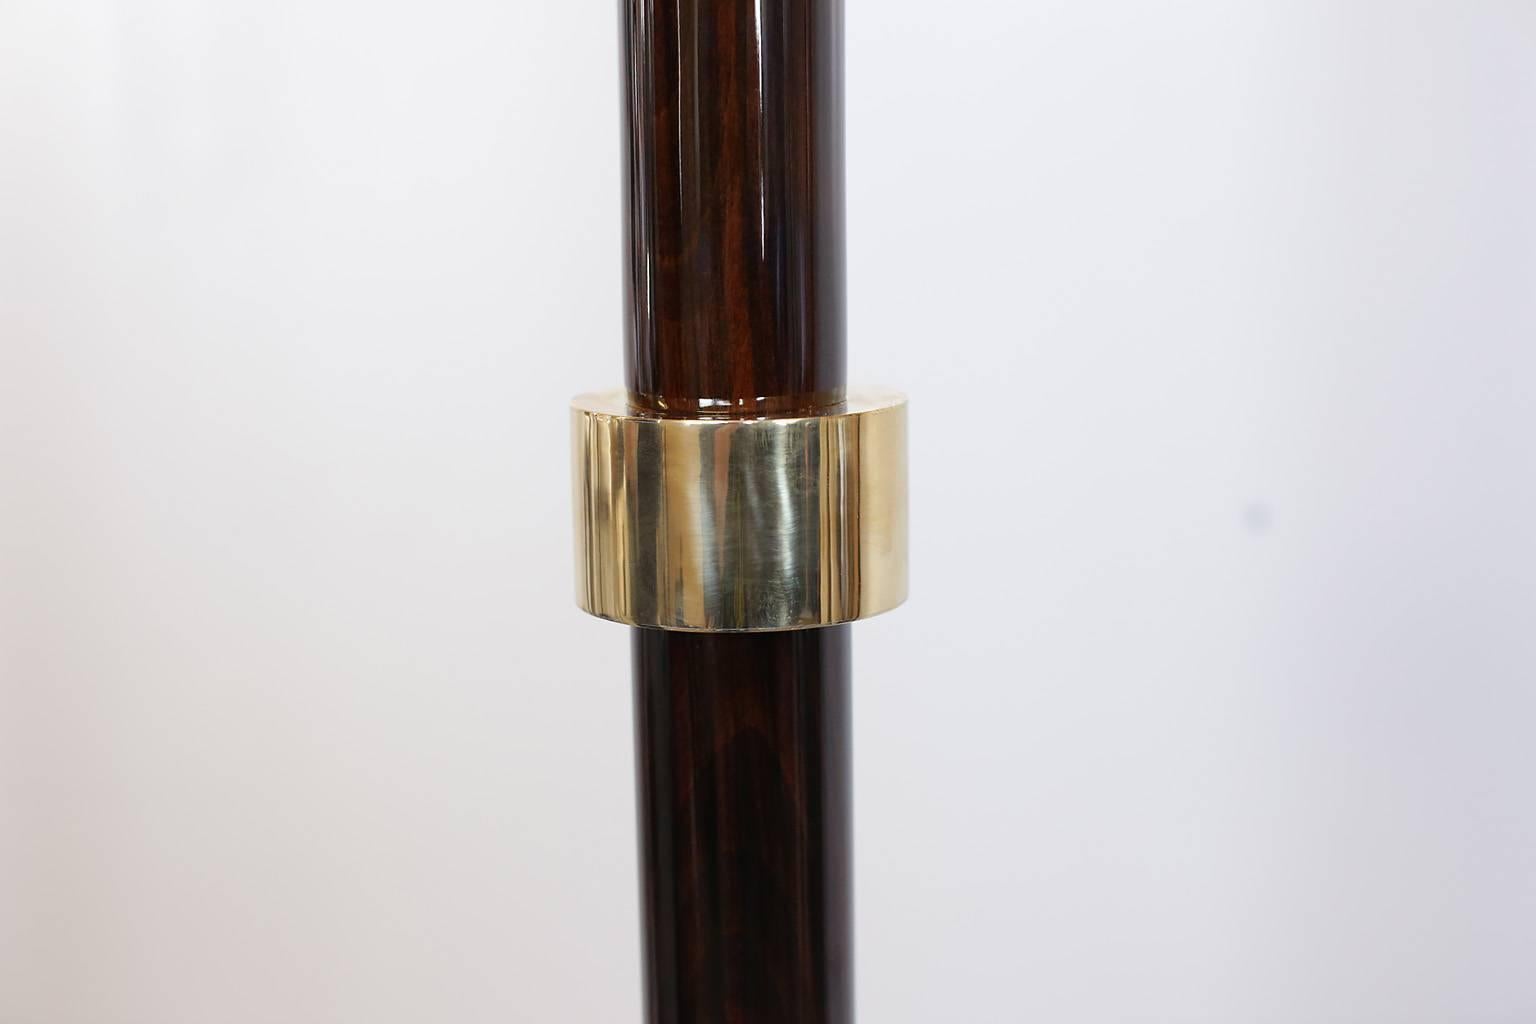  French Art Deco torchiere/floor lamp.. Lacquered wood with brass band details and brass bowl.